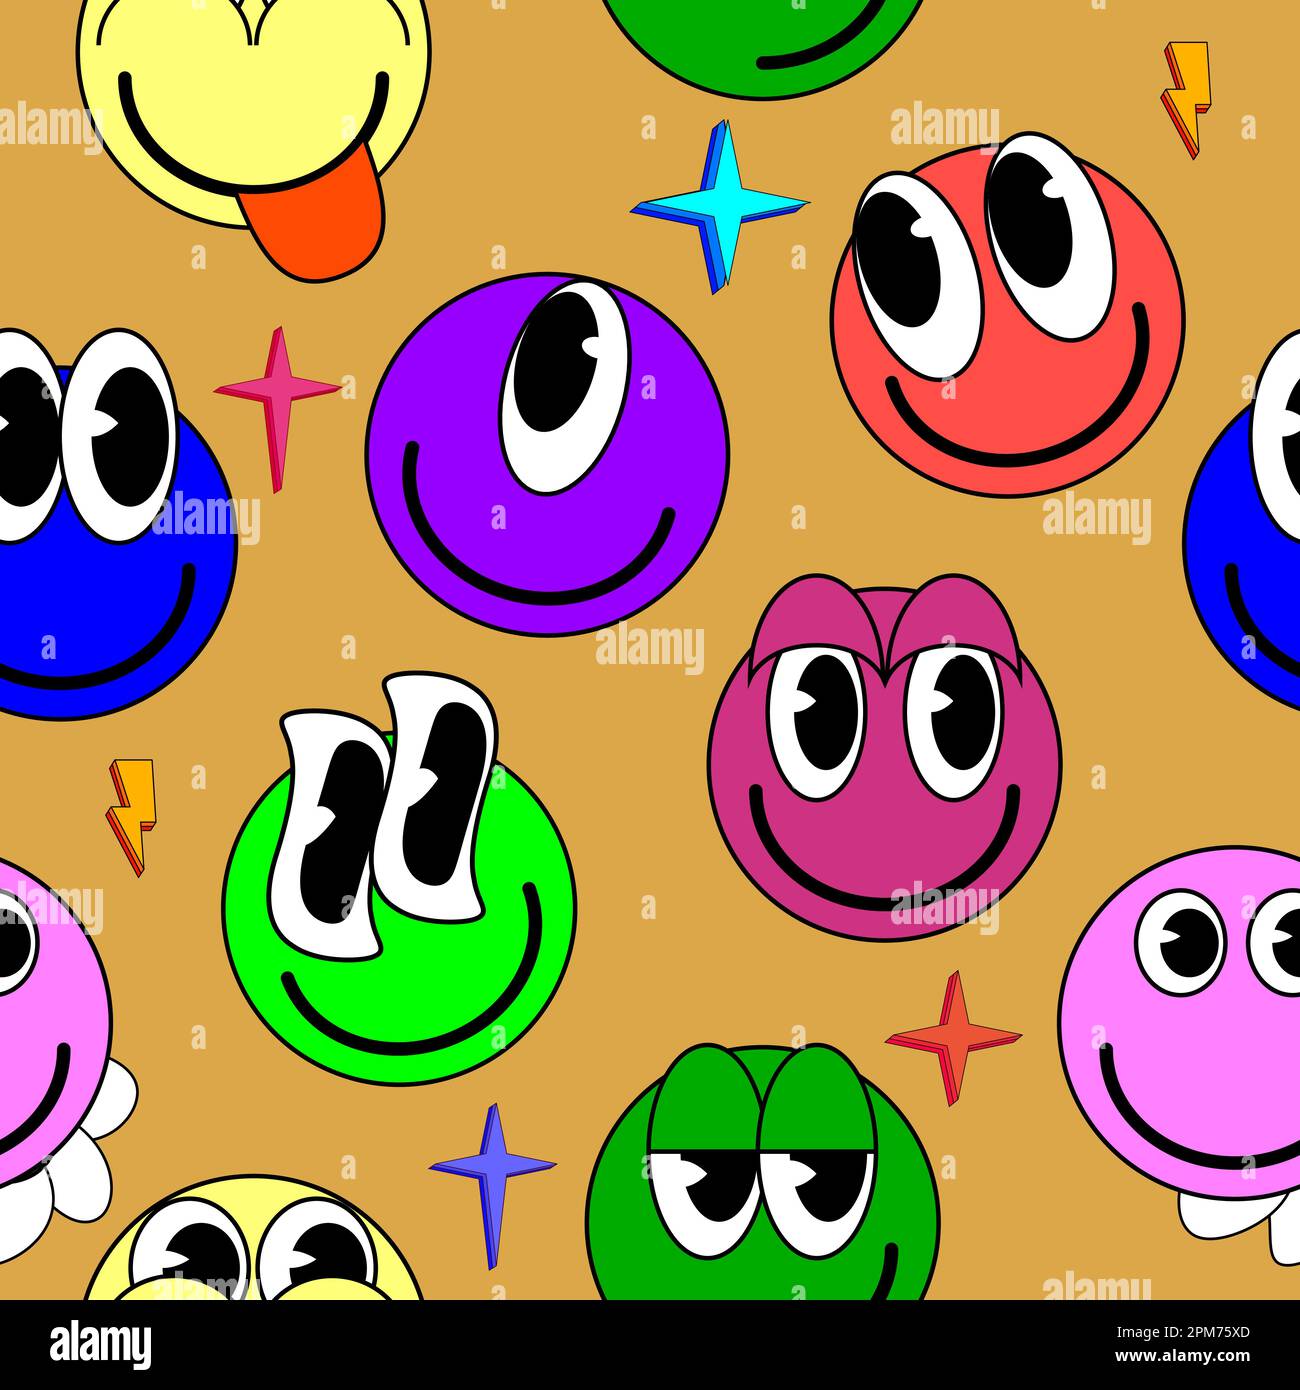 Smiley Face Collection (Background Patterns)